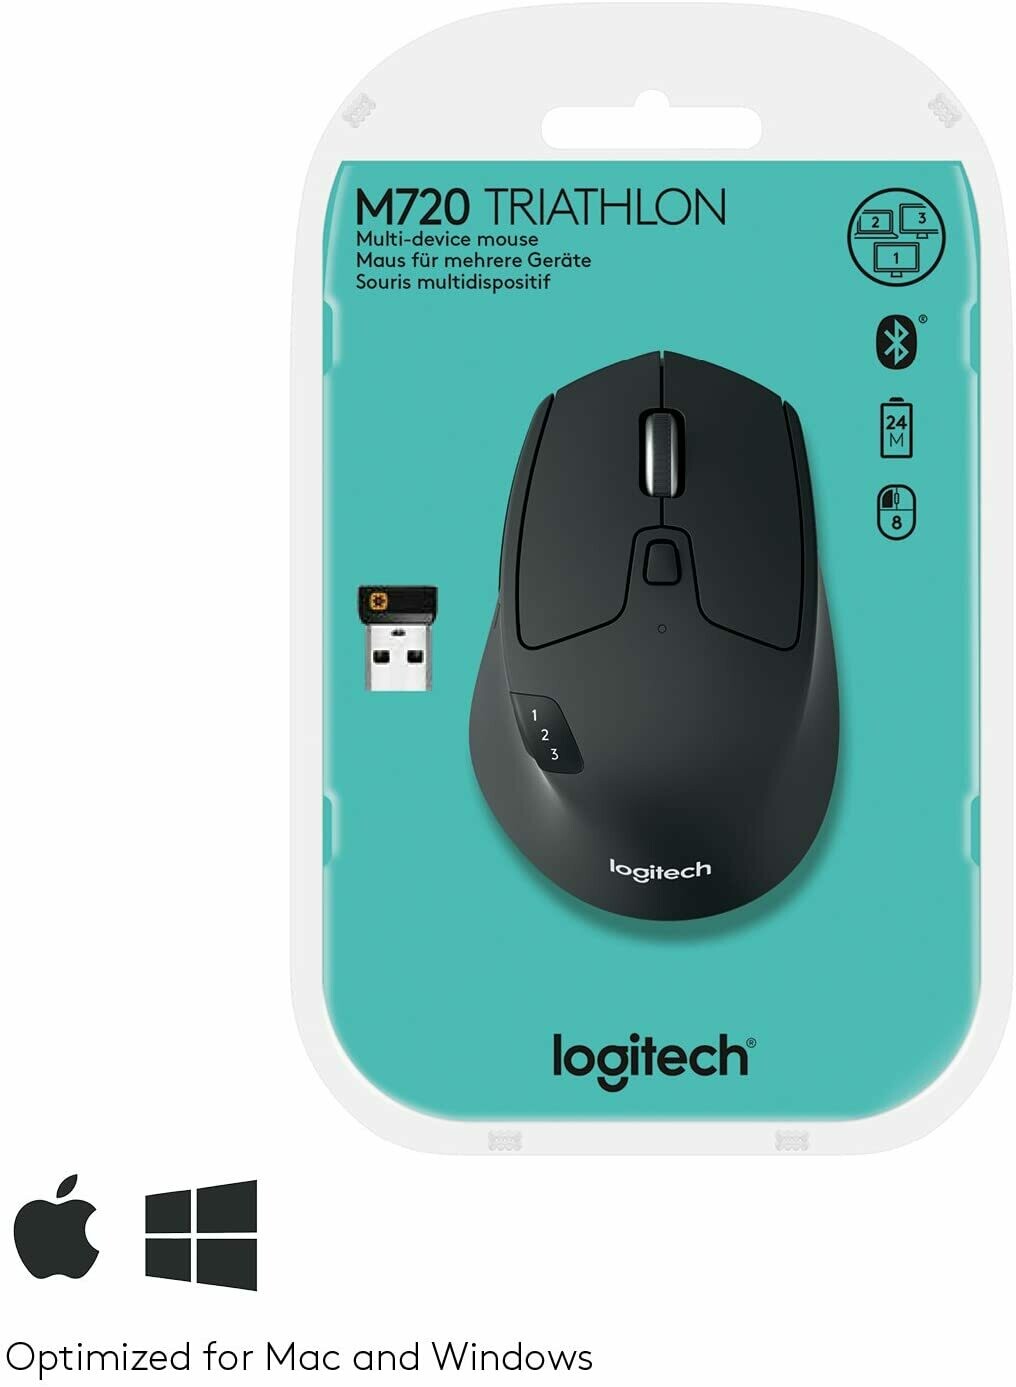 Logitech M720 Triathlon Wireless Mouse, Multi-Device, Bluetooth and 2.4 GHz  with USB Unifying Receiver, 1000 Dpi, 8-Buttons, 24-Month Battery Life,  Laptop/PC/Mac/iPad OS - Graphite Black